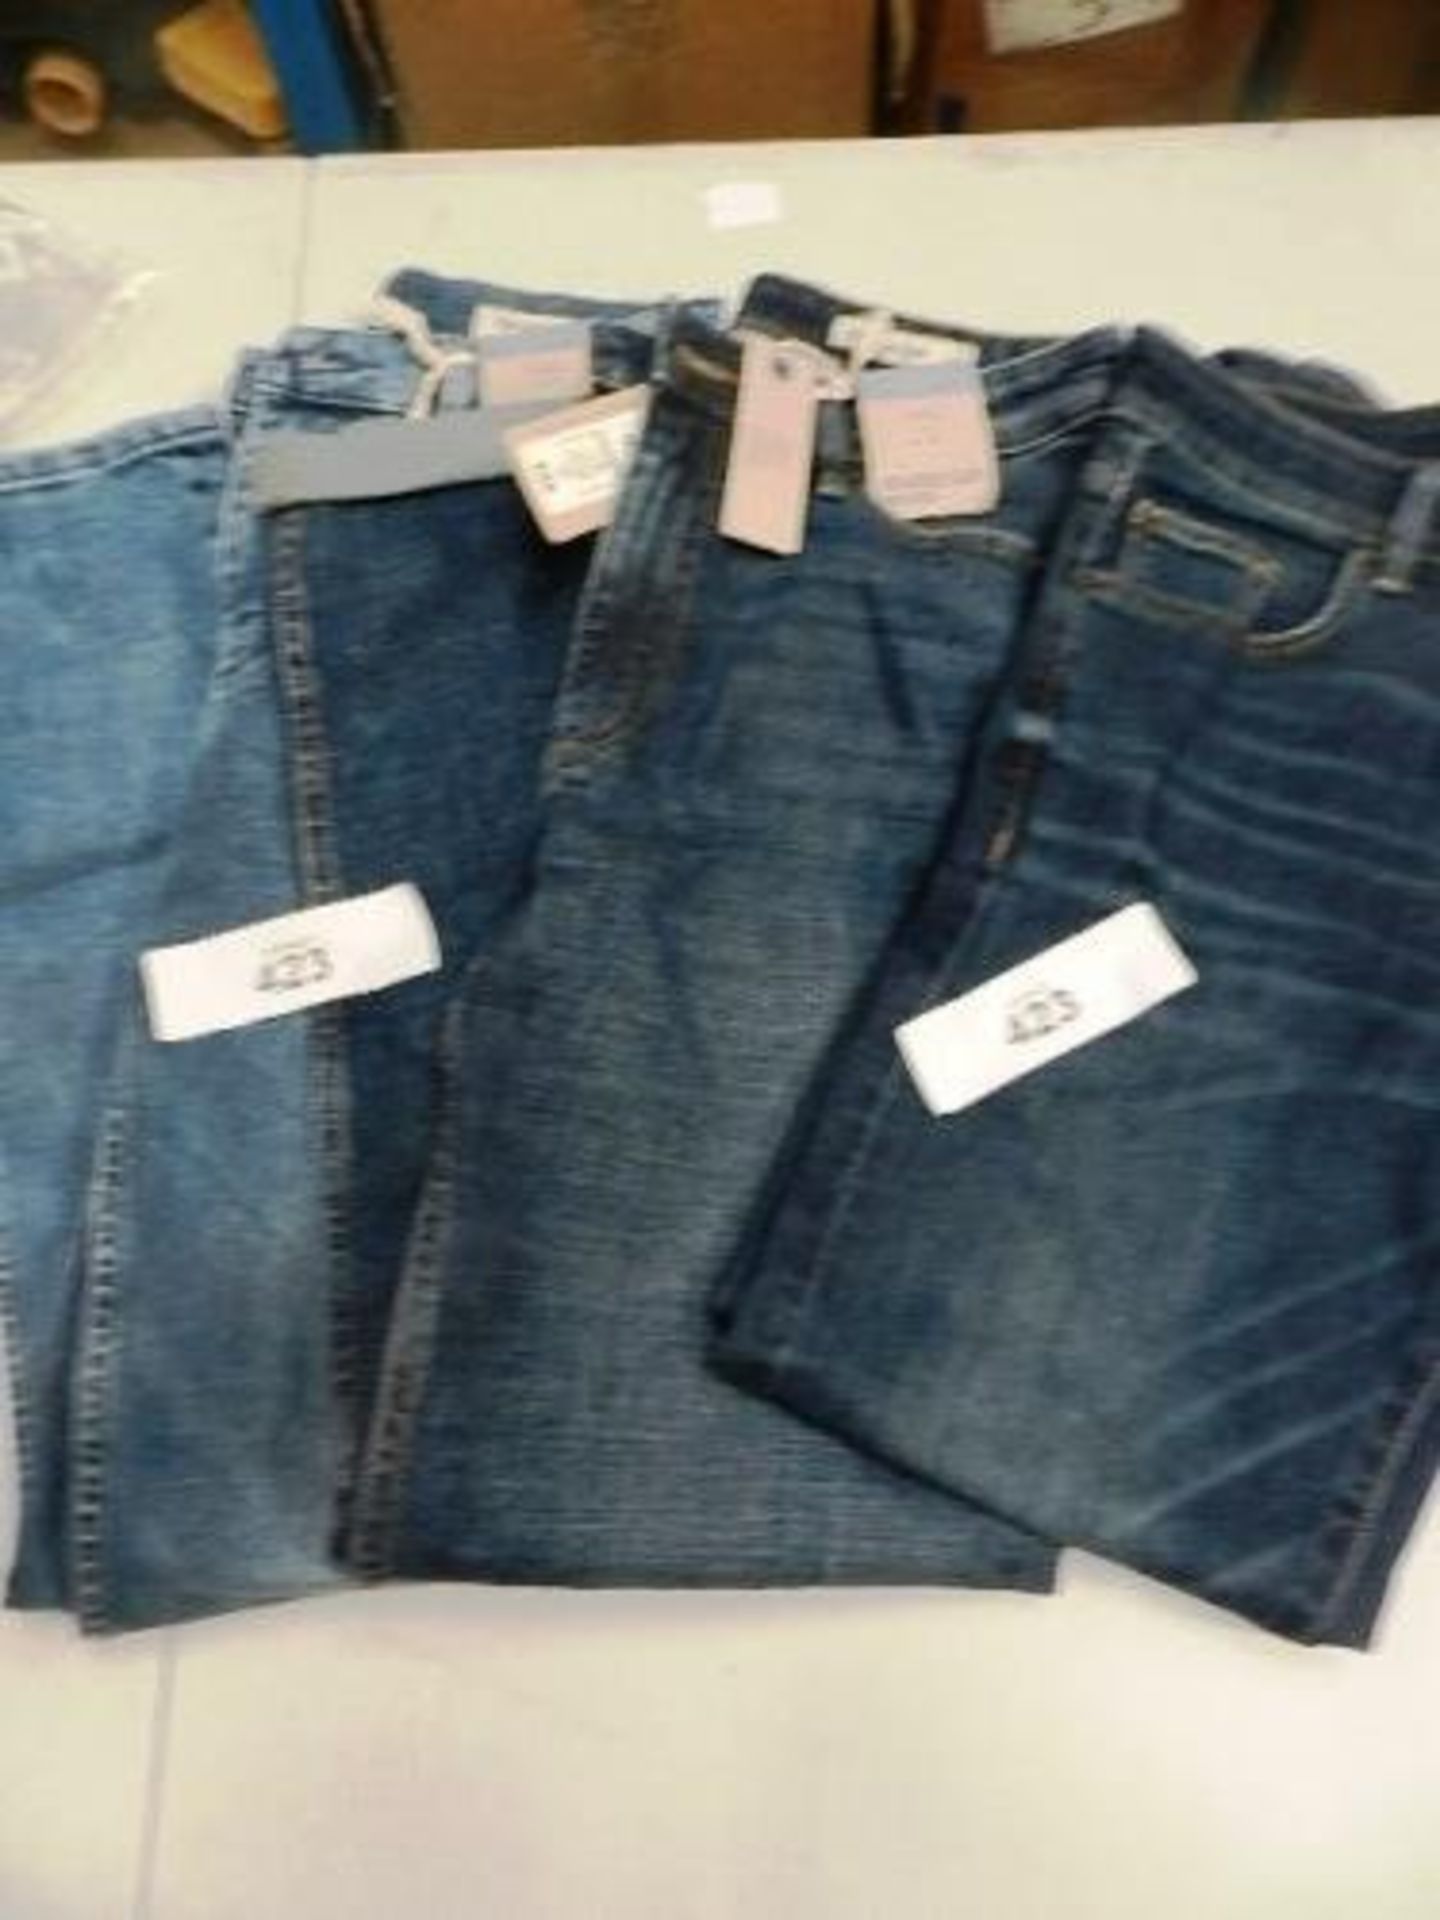 3 x pairs of M&S skinny fit jeans, RRP £25.00 each, all size 8 - New (ES15A)